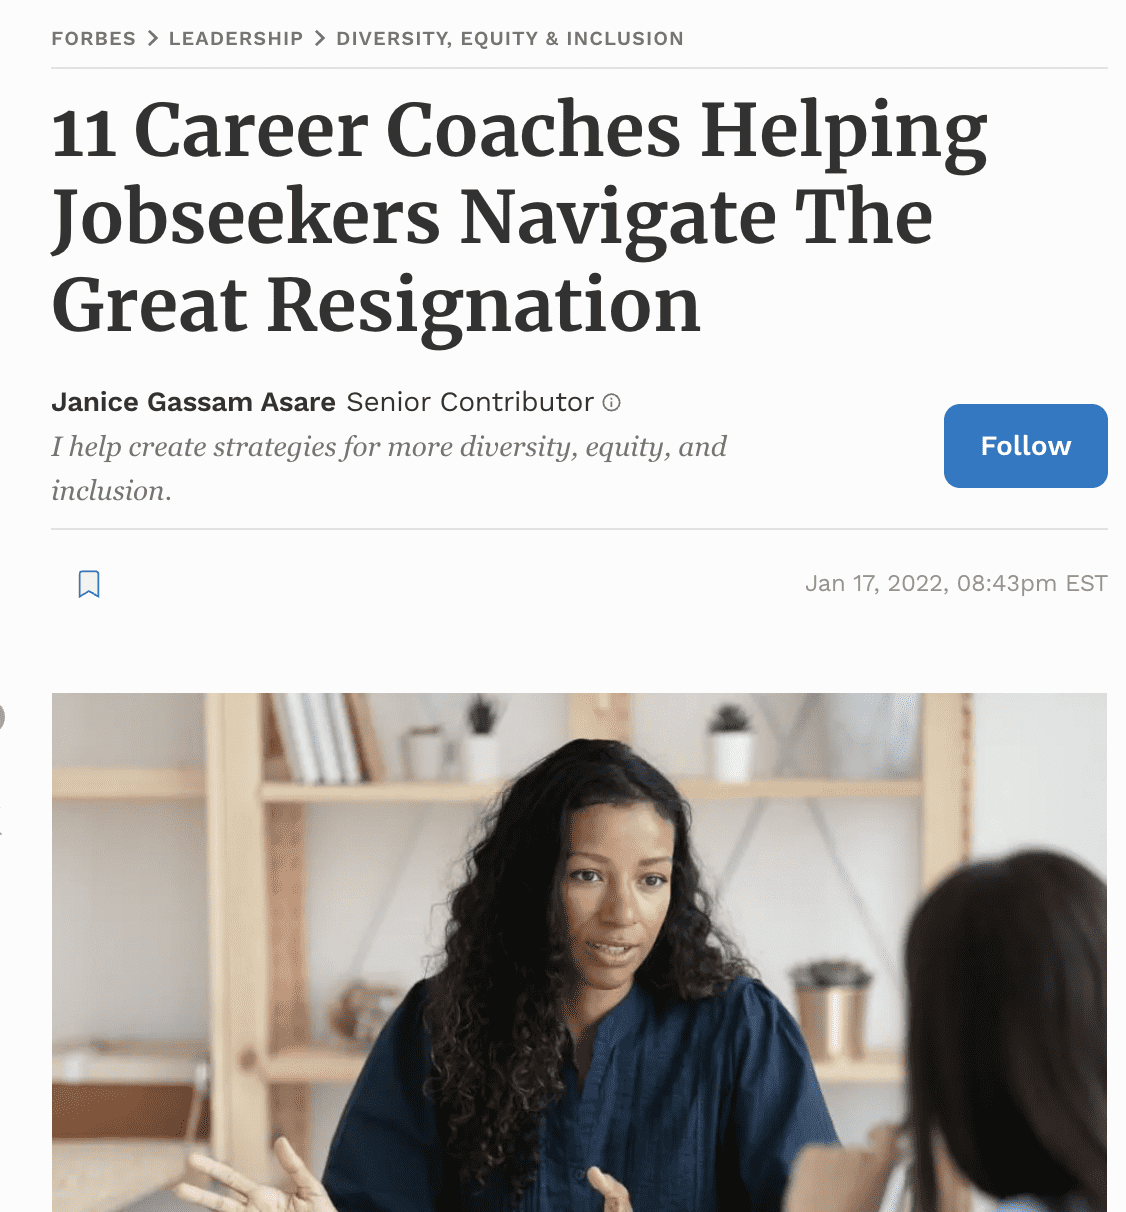 Forbes - January 2022

Gina was delighted to be included in Janice Gassam’s 2022 Forbes article “11 Career Coaches Helping Jobseekers Navigate The Great Resignation”